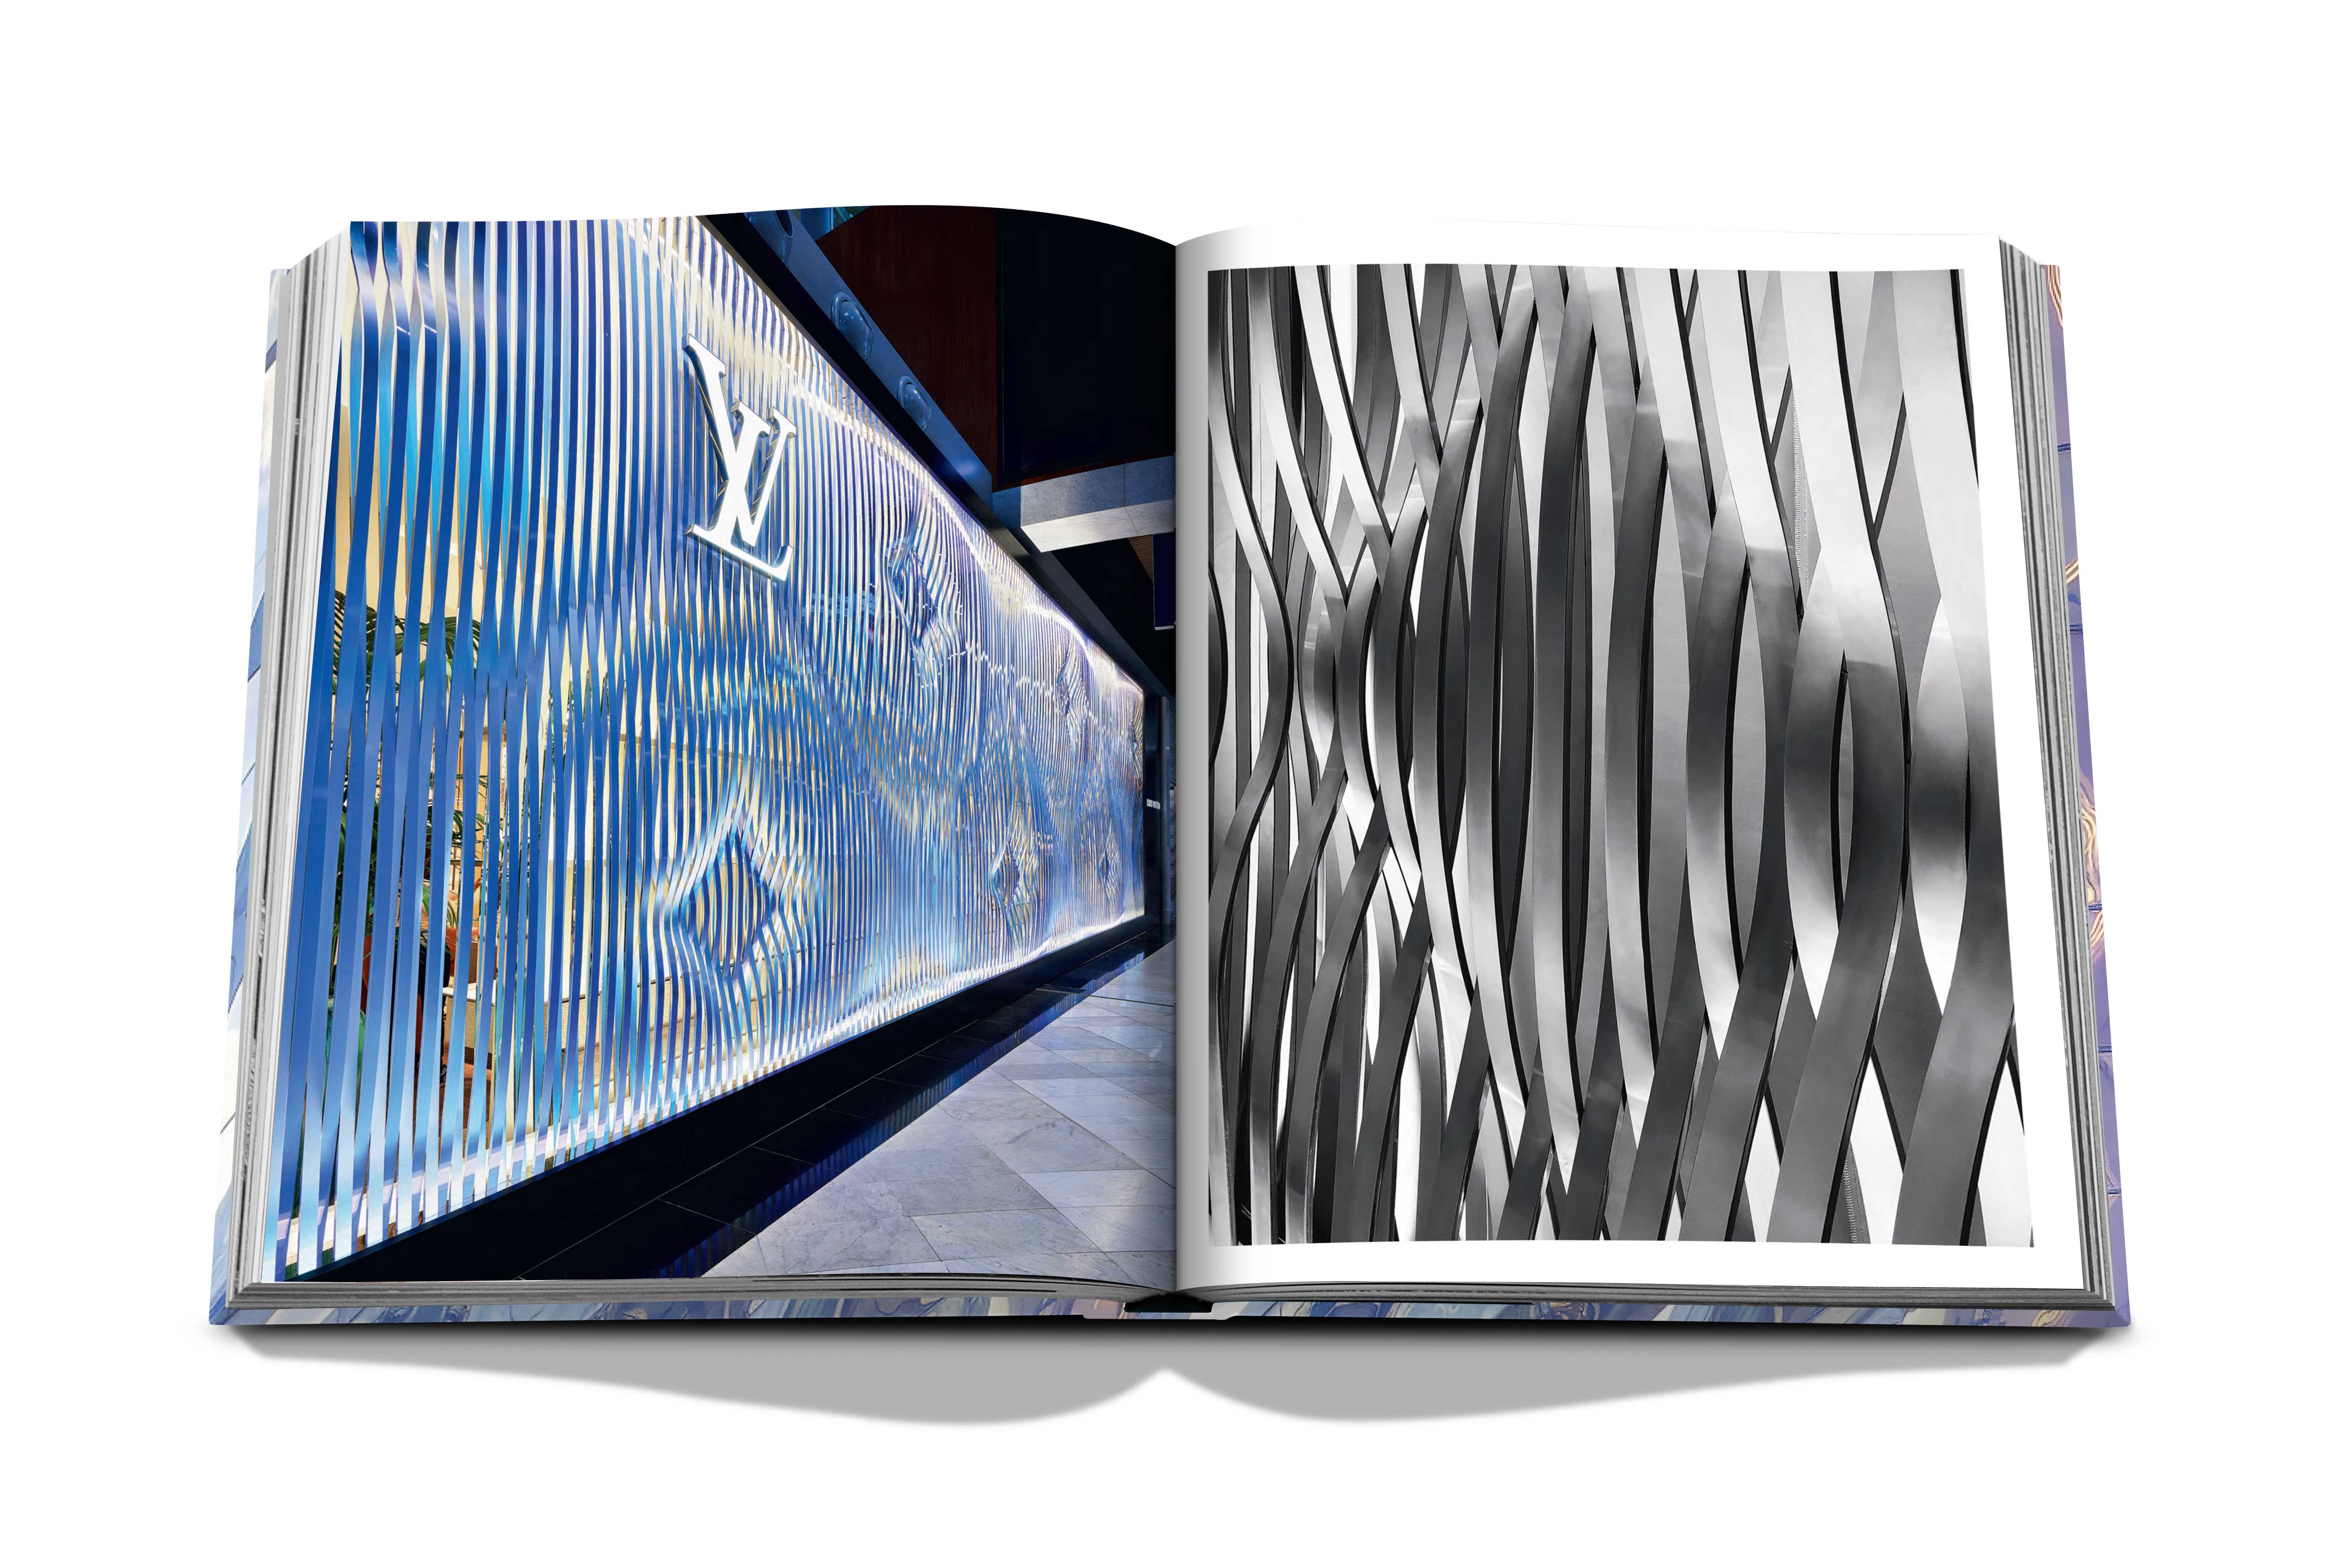 Louis Vuitton Skin: Architecture of Luxury (Tokyo Edition) by Paul  Goldberger - Coffee Table Book